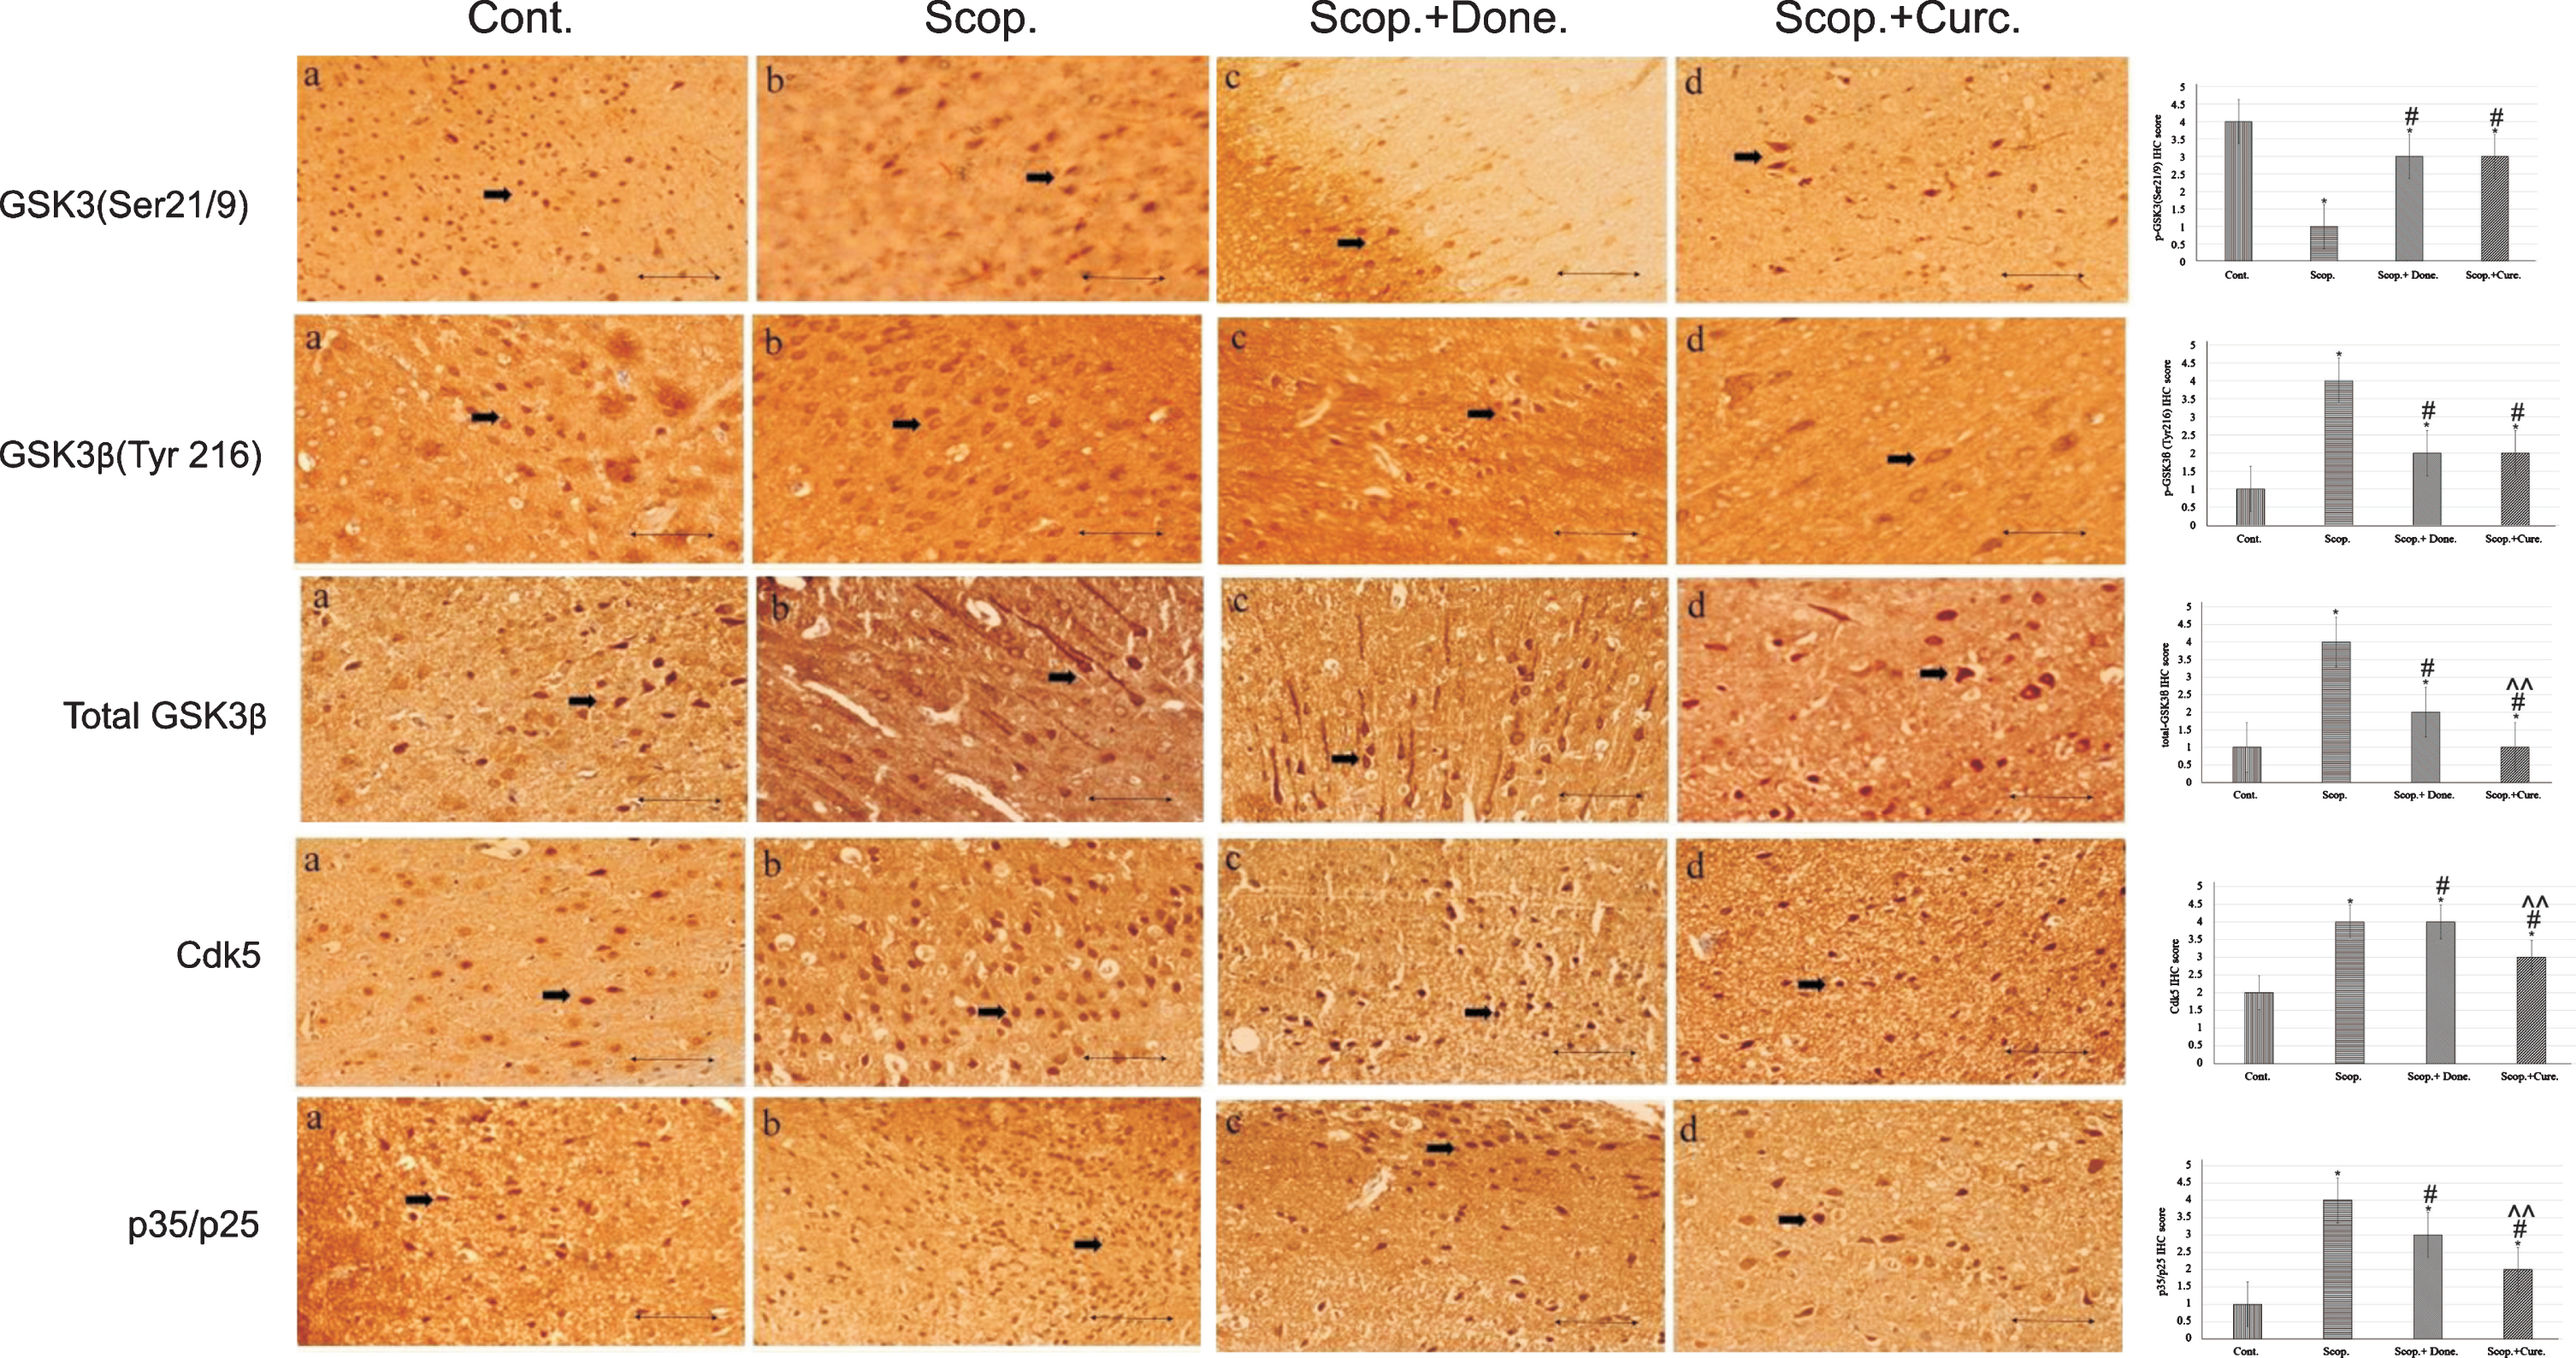 Immunohistochemistry images of (i) GSK3α/β(Ser 9/Ser21), (ii) GSK3β(Tyr 216), (iii) total GSK3β, (iv) Cdk5, and (v) p35/p25 in the brain sections (cortex) of rat that were treated with Cont., Scop., Scop.+Done., and Scop.+Curc. The assay (n = 4) was done in triplicate. Lens objective: 40x. Scale bar represents 1 μ. (*p < 0.001, **p < 0.01, and ***p < 0.05 versus saline-treated group; #p < 0.001, ##p < 0.01, and # # #p < 0.05 versus scopolamine-induced AD rats, ∧p < 0.001, ∧∧p < 0.01, and ∧∧∧p < 0.05 versus scopolamine-donepezil rats. n = 4). Cont., control; Scop., scopolamine; Done., donepezil; Curc., curcumin.